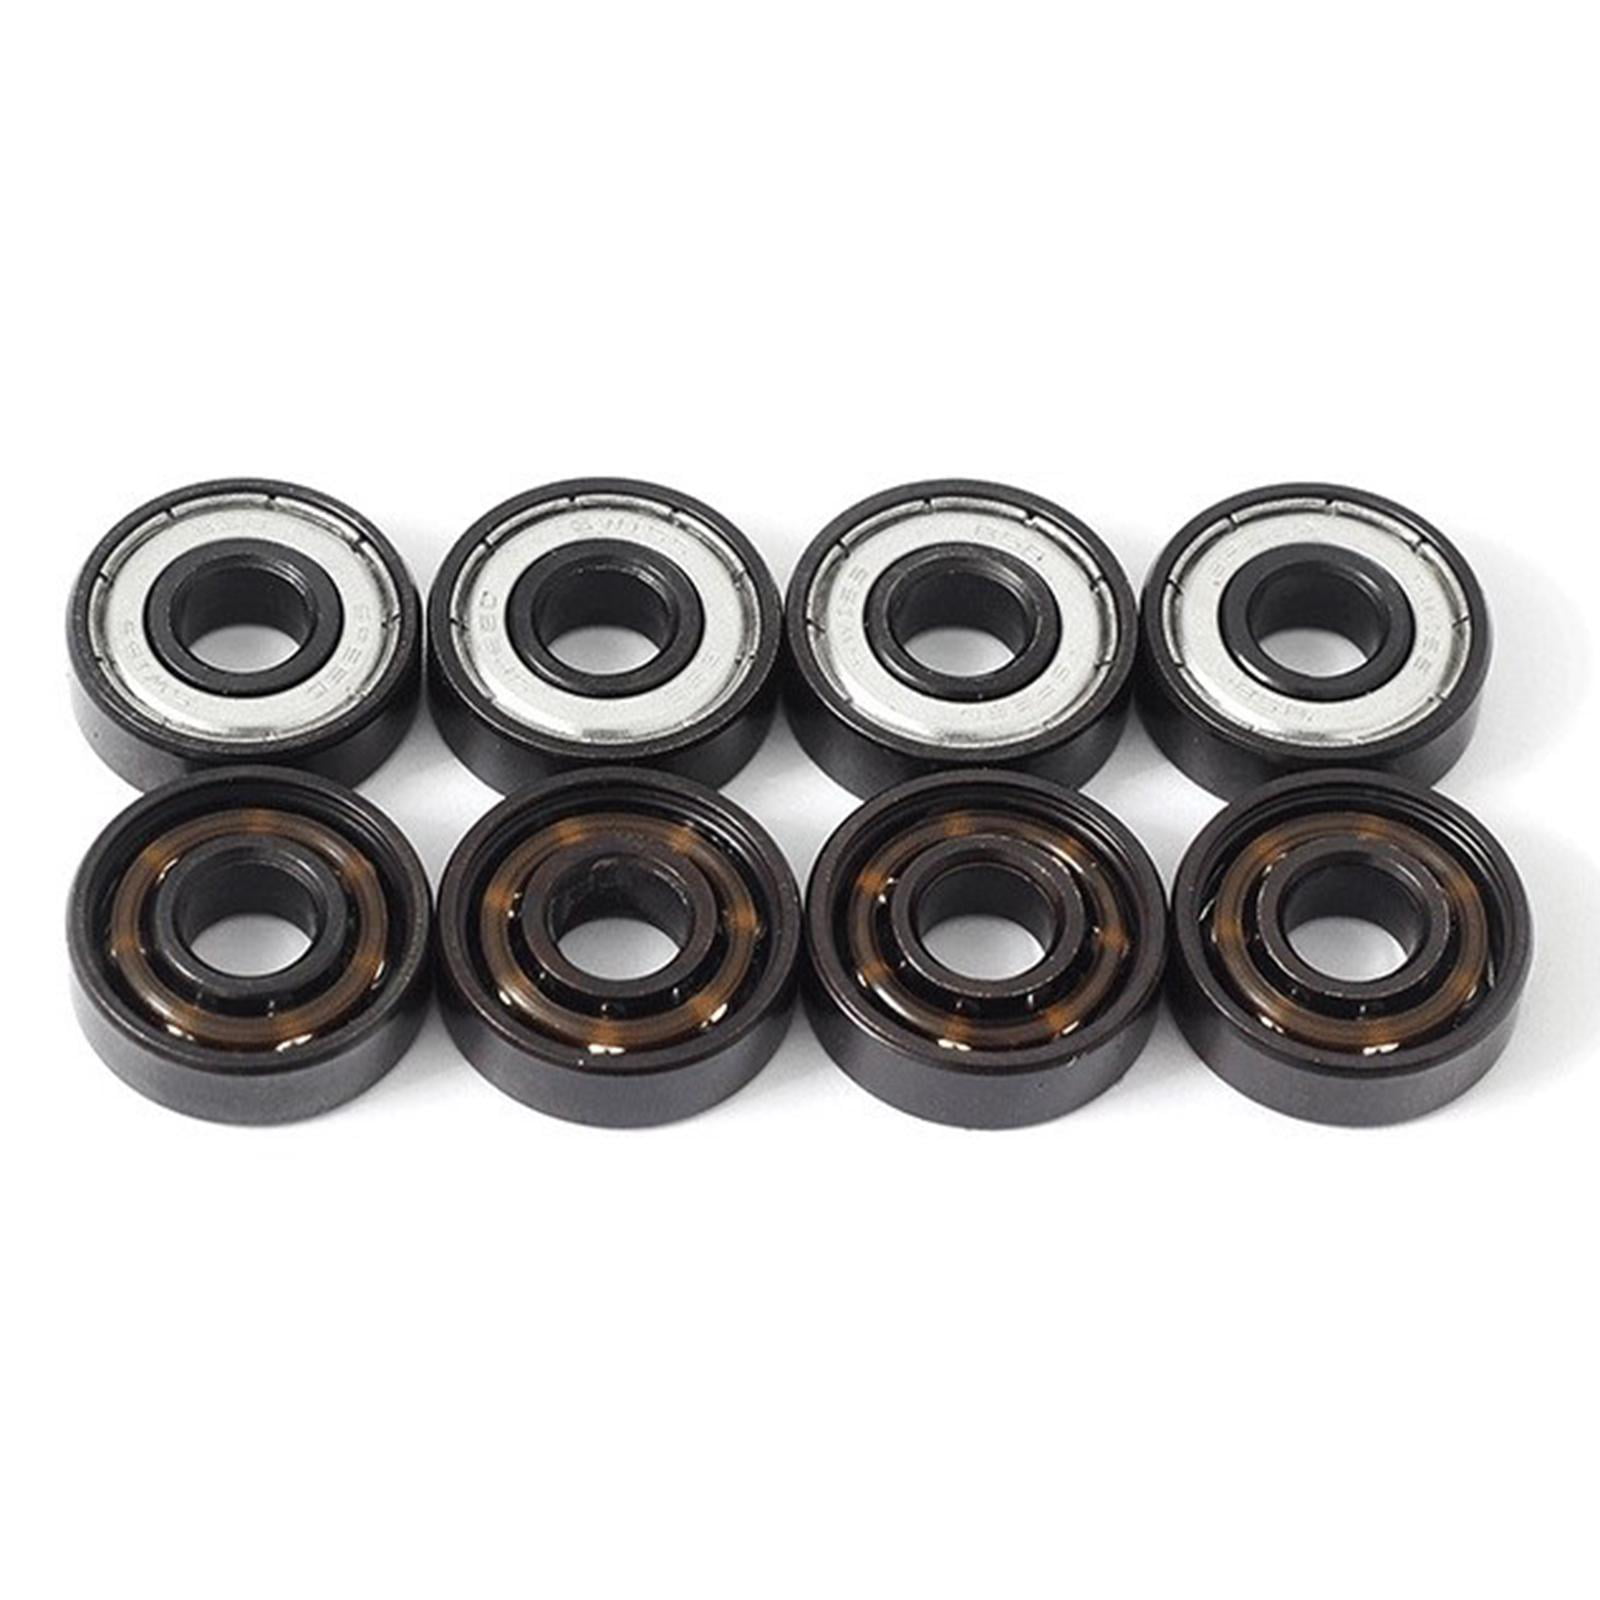 16 Pack 608 Skateboard Bearings 8mm for Skate Rated Scooter Wheels Accessory 